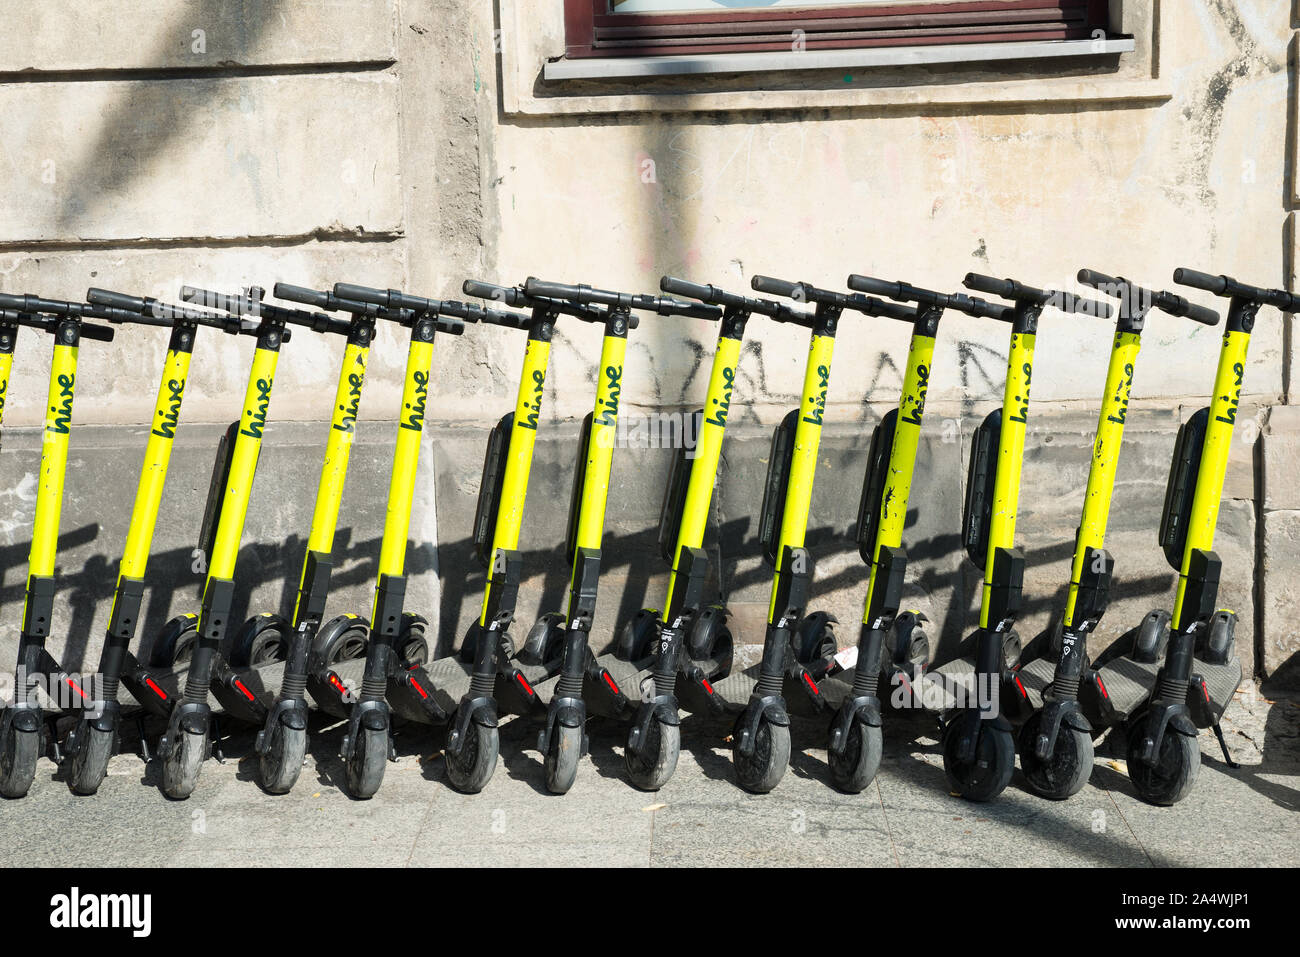 electric kick scooters from scooter-sharing system parked on a sidewalk in Warsaw, Poland Stock Photo